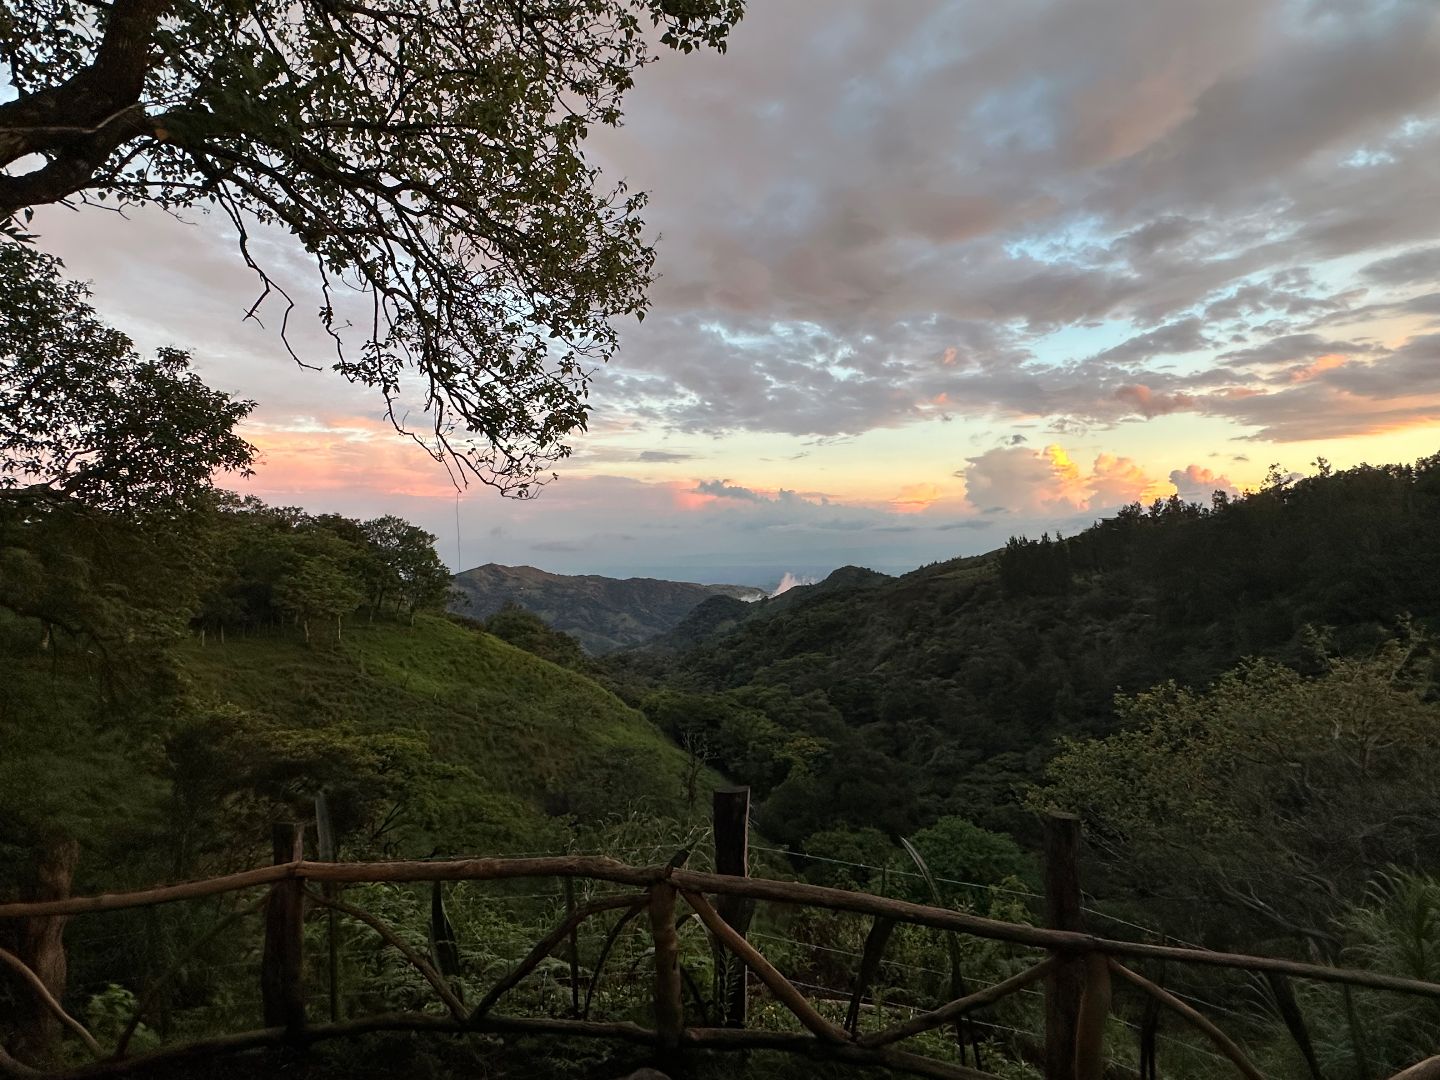 Sunrise over the mountains of Costa Rica